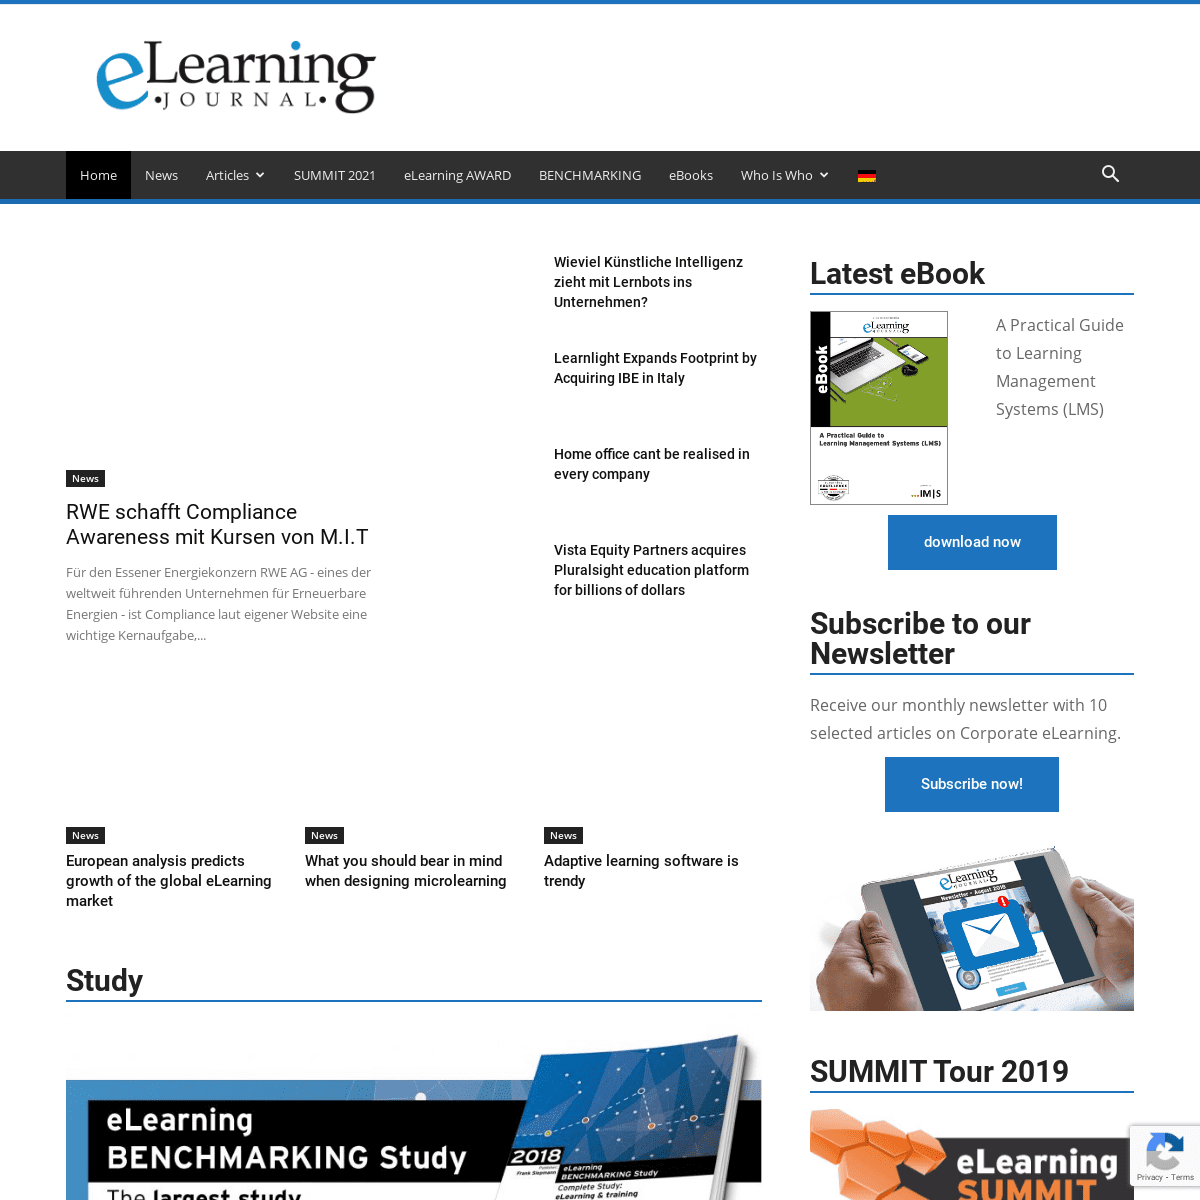 A complete backup of https://elearning-journal.com